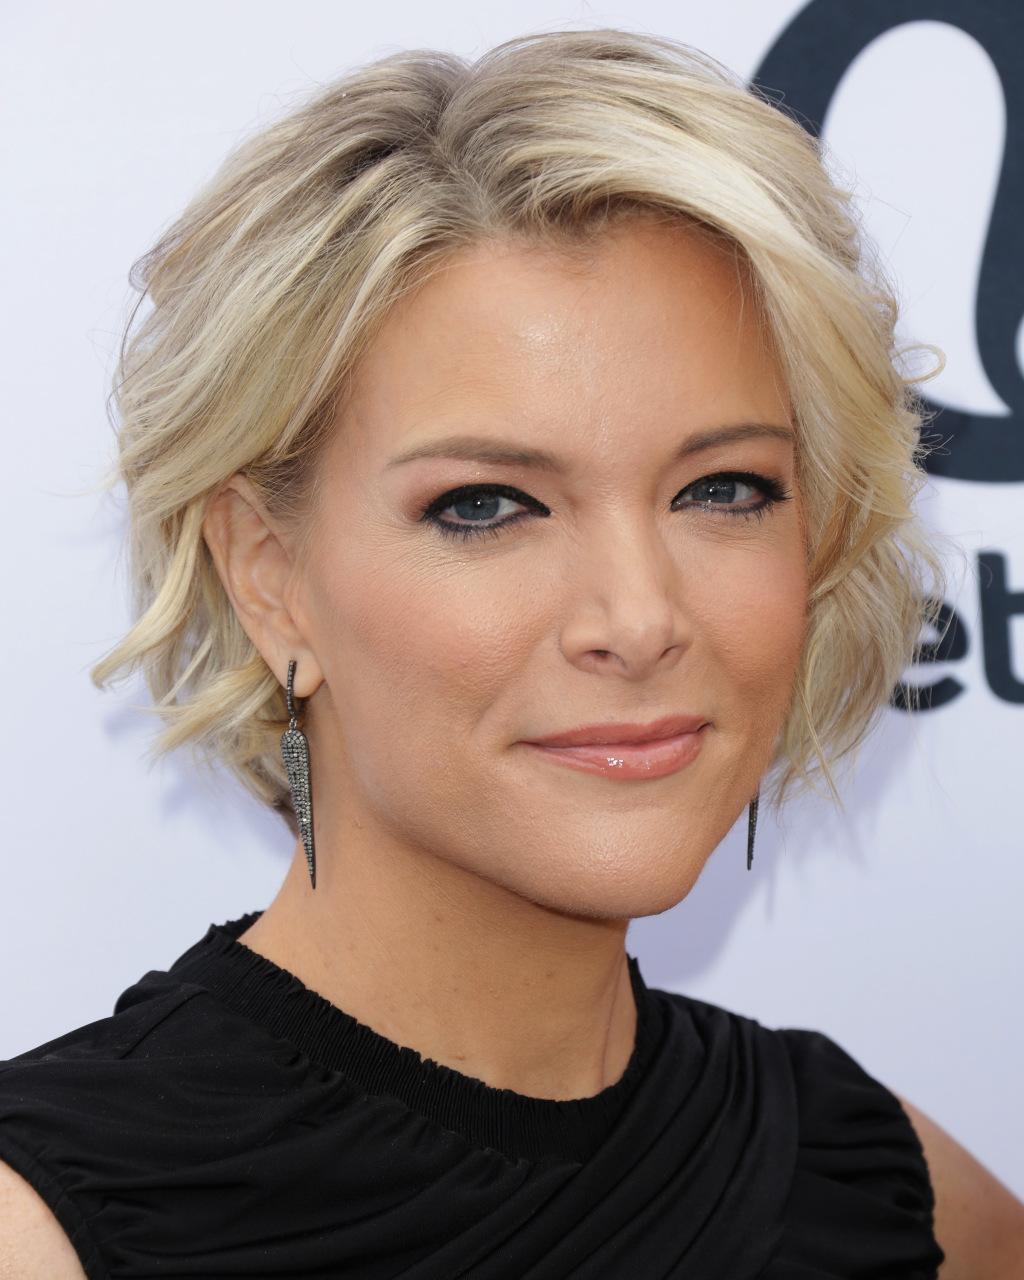 75+ Hot Pictures Of Megyn Kelly Prove That She Is Sexiest Journalist In America | Best Of Comic Books